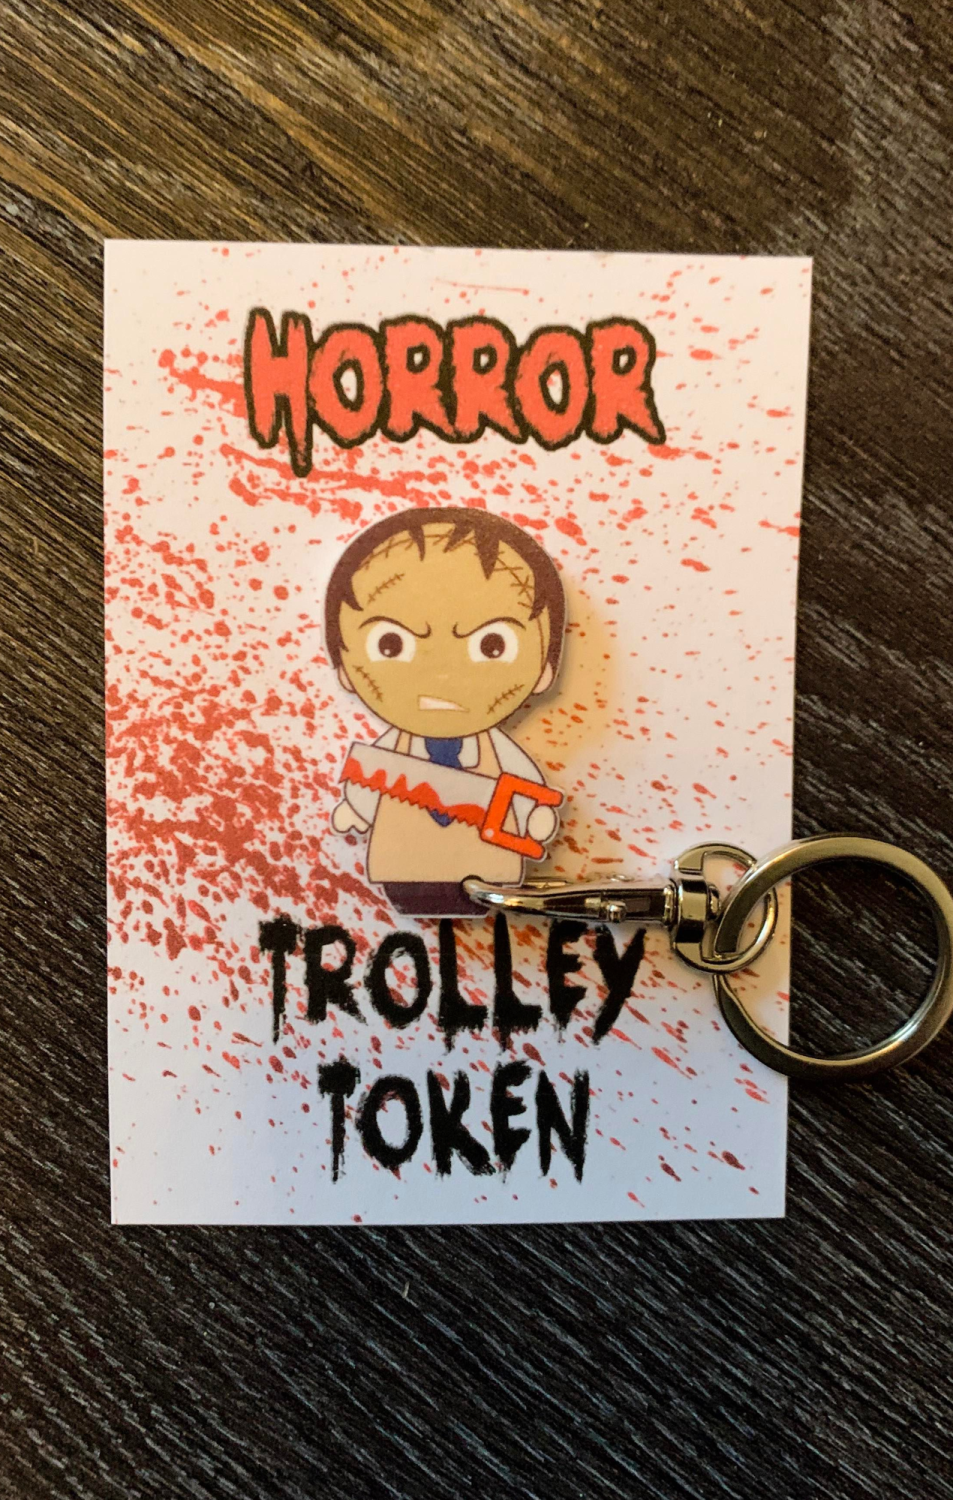 Leatherface Trolley Token - Texas Chainsaw Massacre